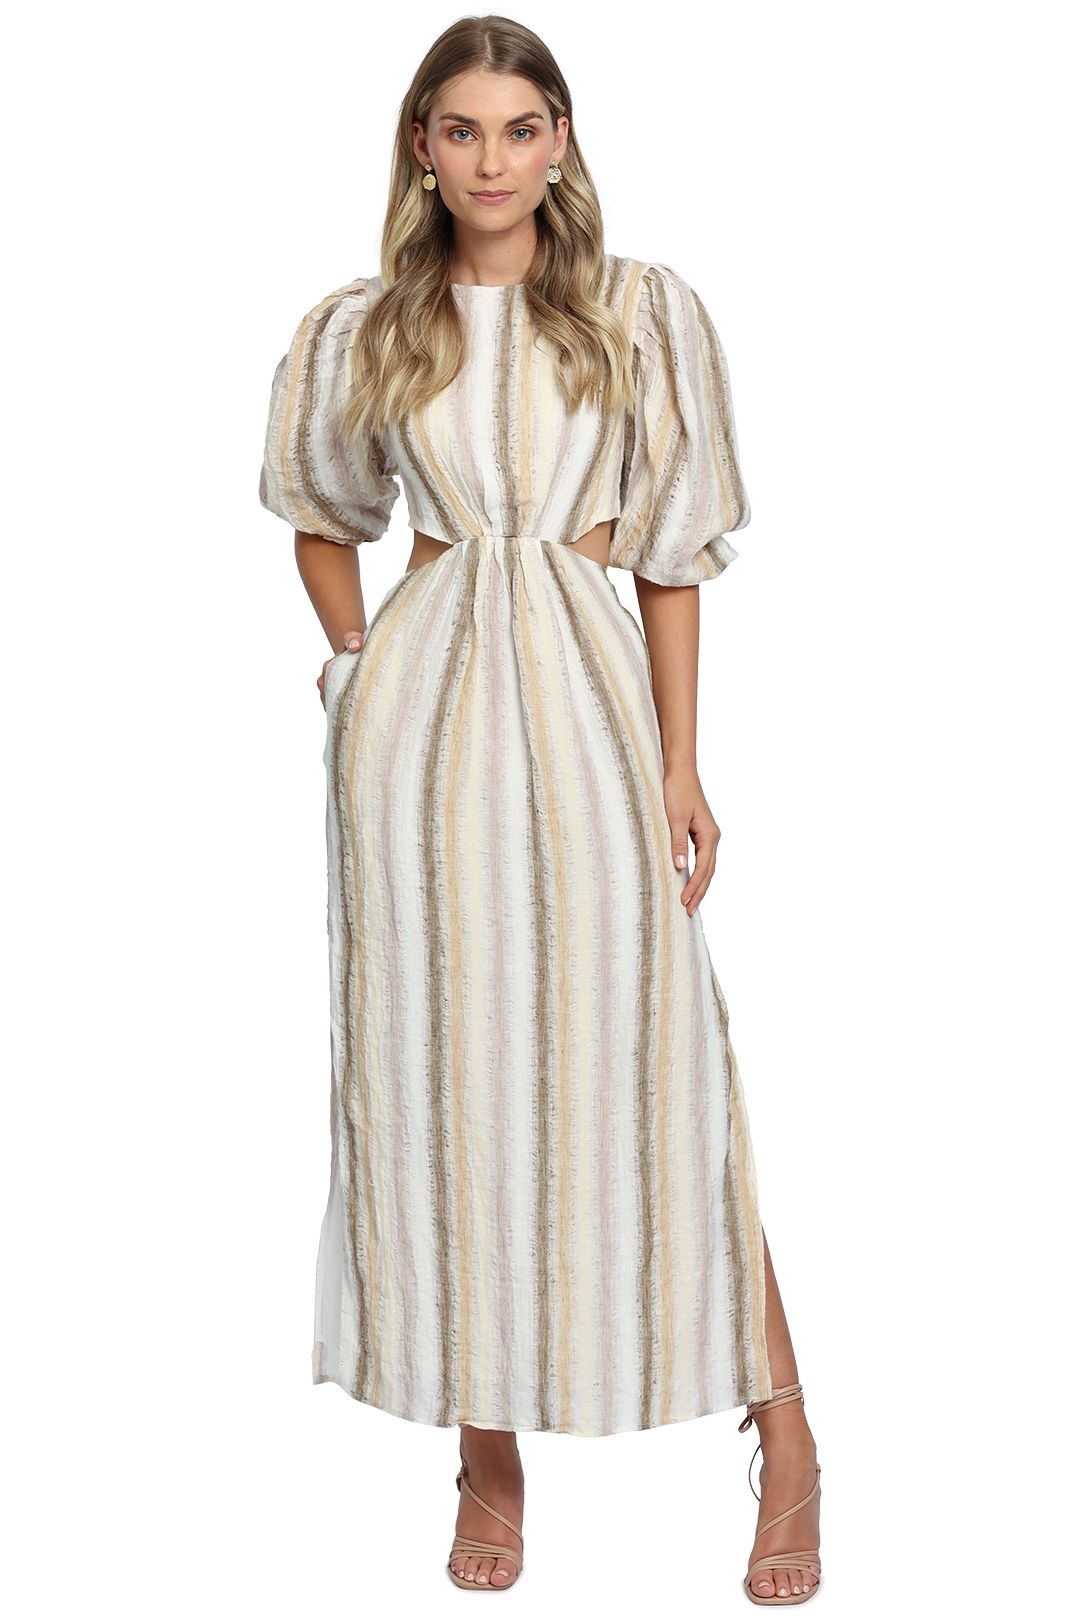 Ministry of Style Seventies Soul Stripe Maxi Dress cutout